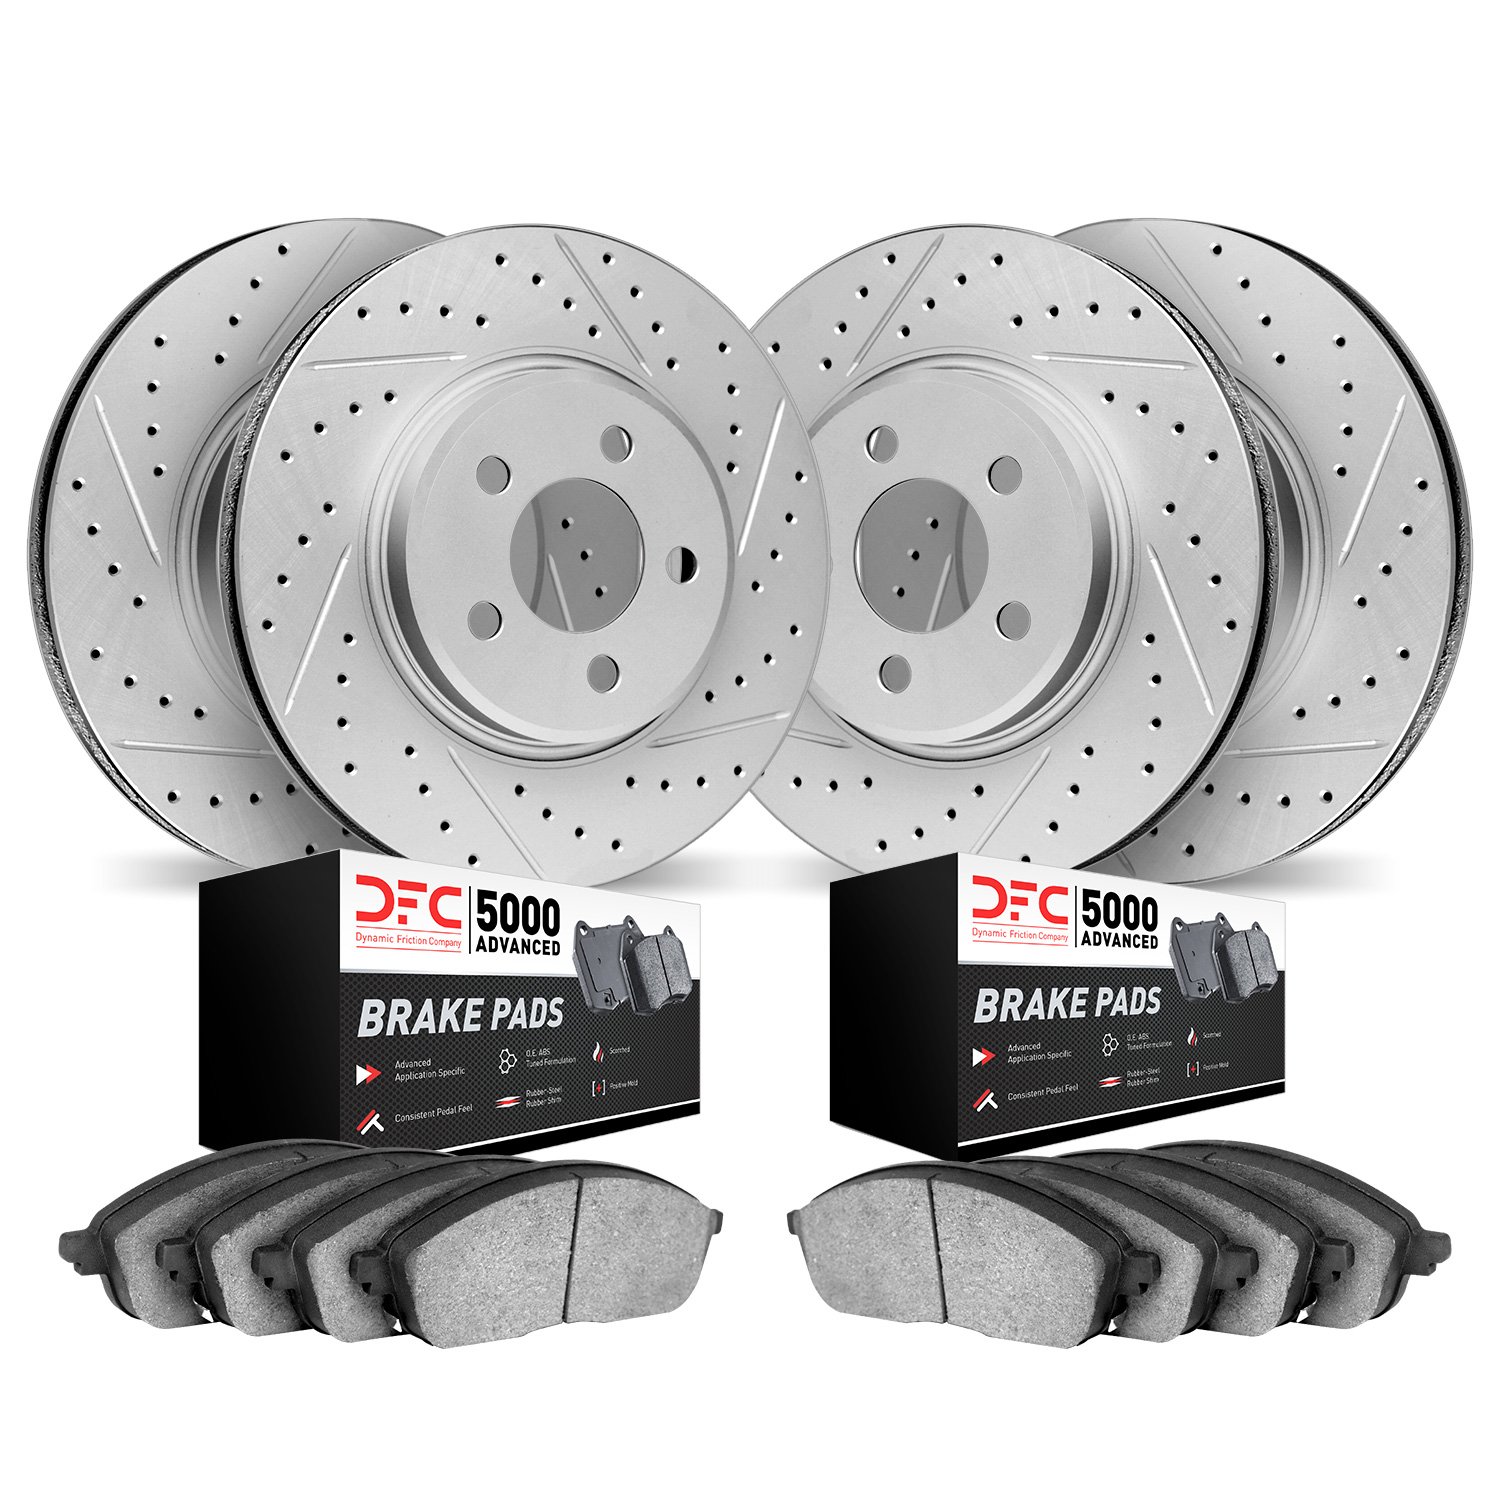 2504-27010 Geoperformance Drilled/Slotted Rotors w/5000 Advanced Brake Pads Kit, 2016-2016 Volvo, Position: Front and Rear